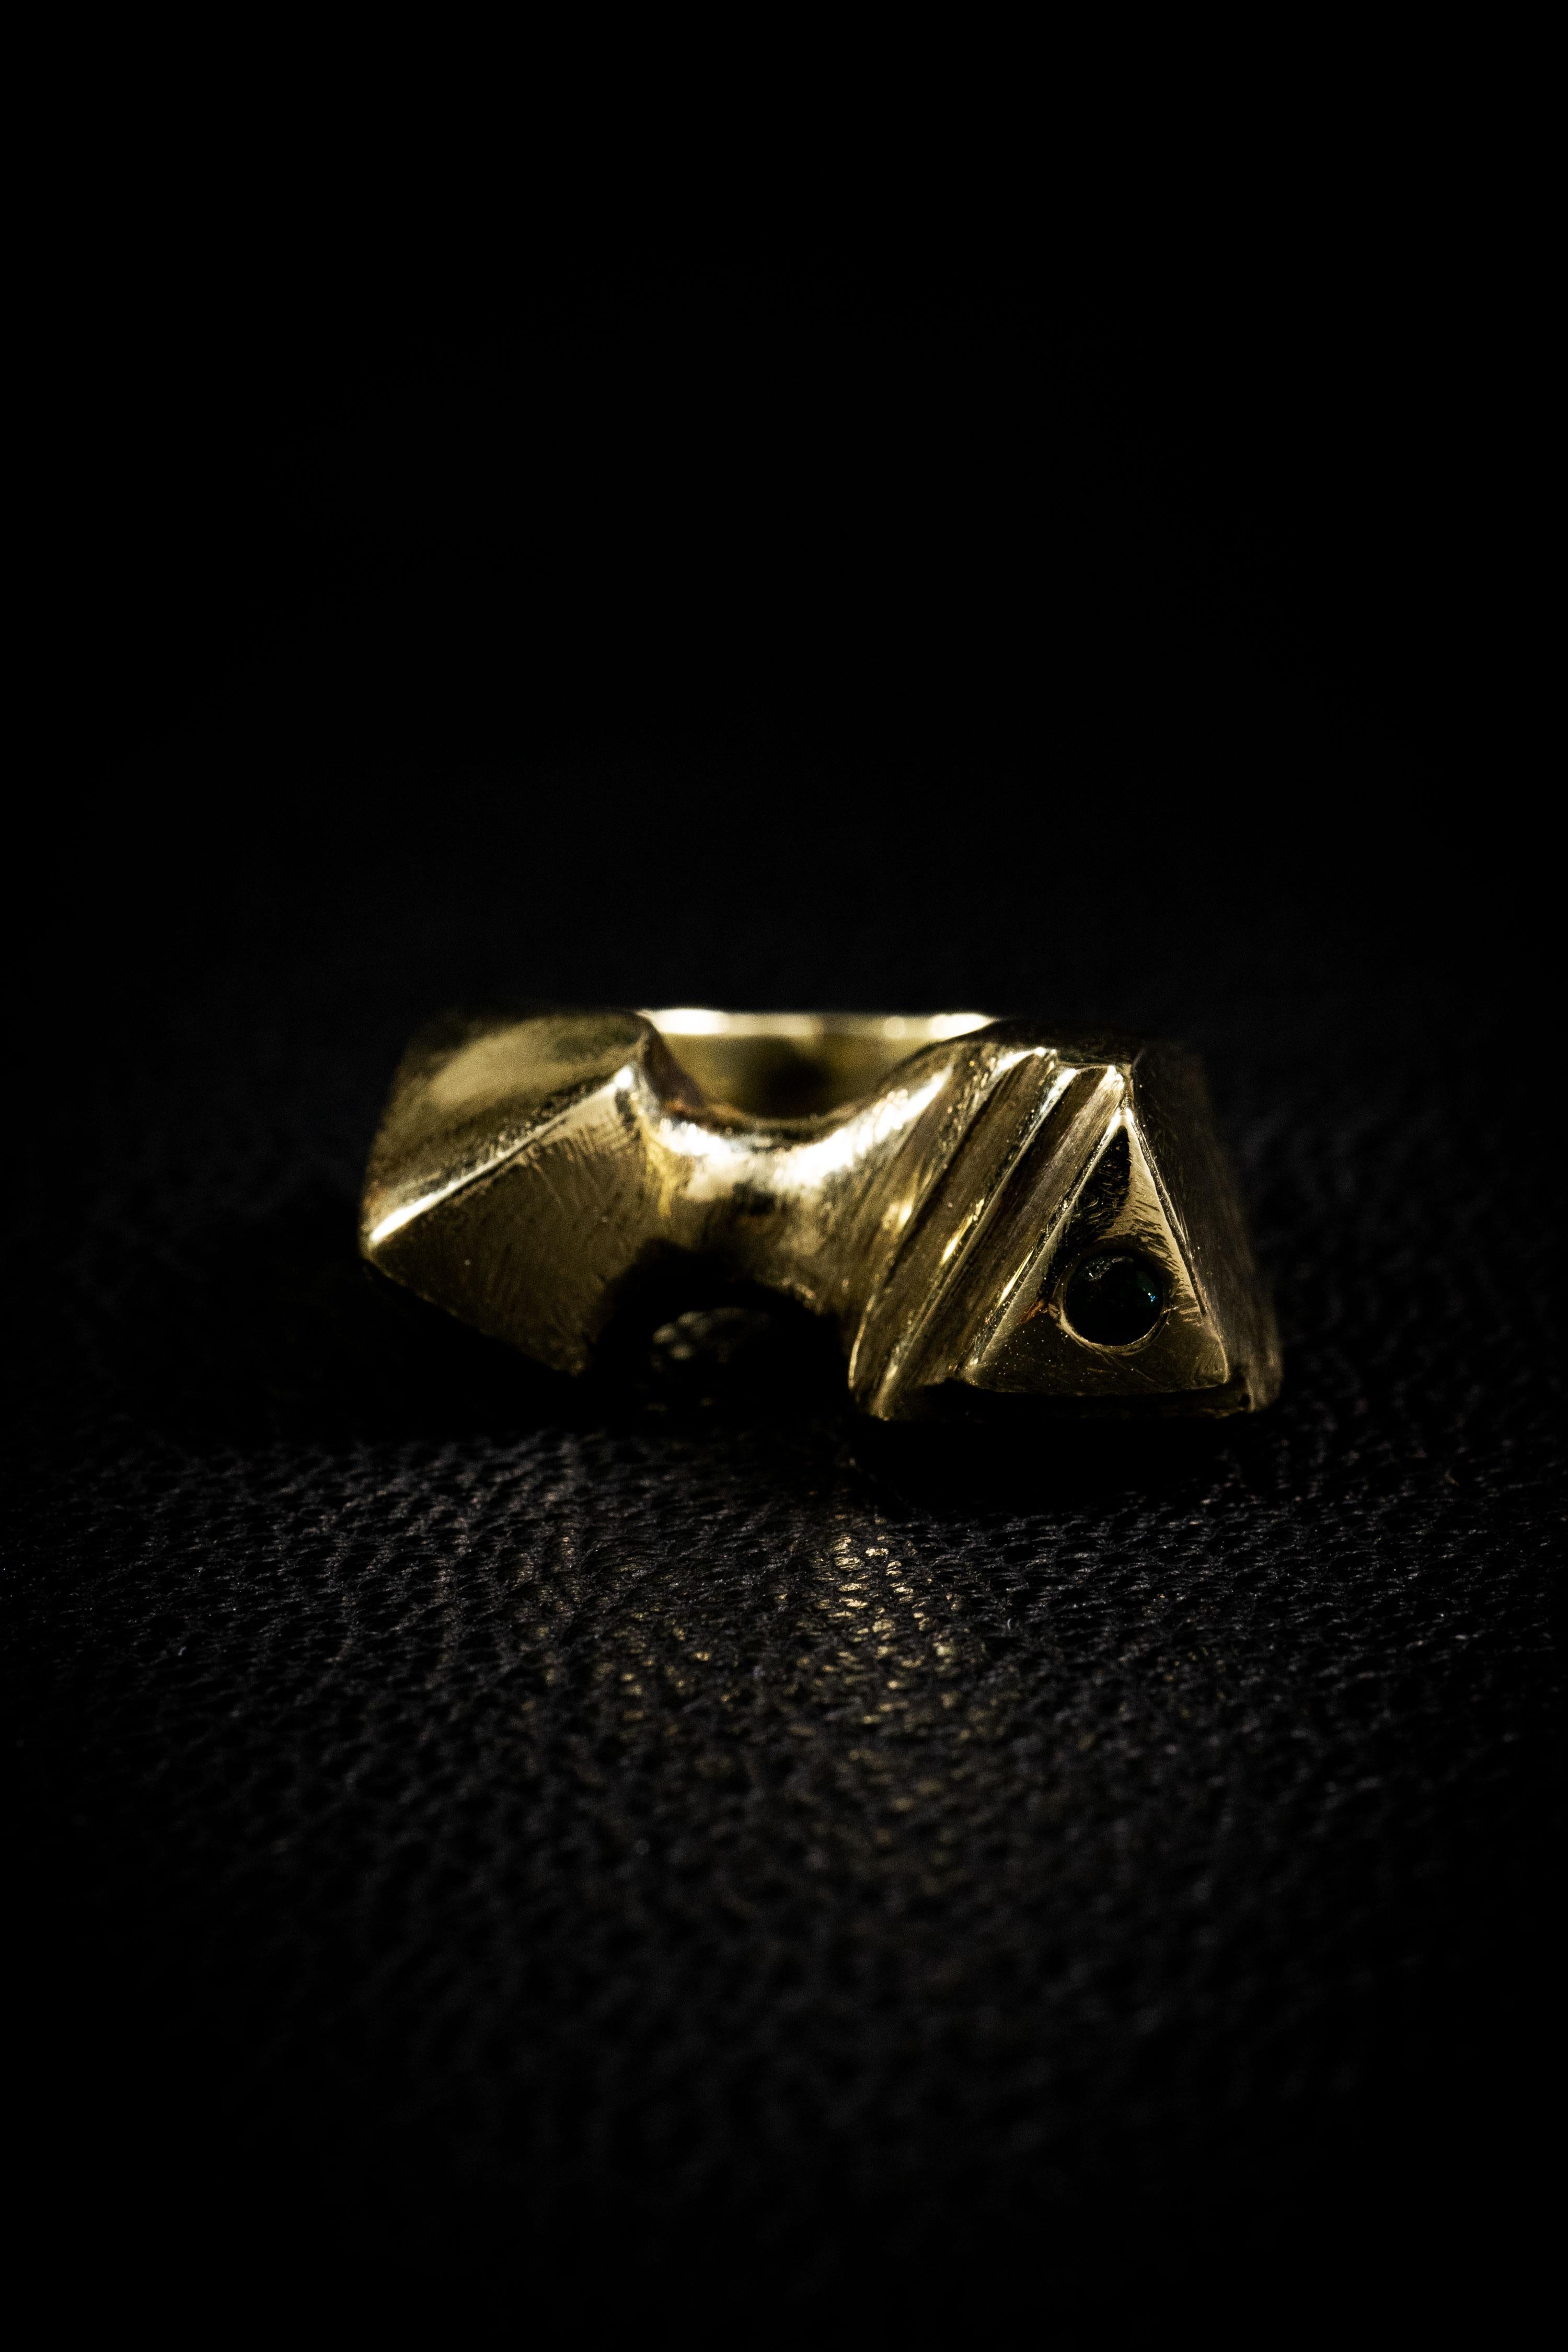 Pyramid is a limited edition ring by Ken Fury that is hand-carved in wax and cast in 10K solid yellow gold with the choice of a genuine emerald or a genuine diamond stone.

Metal: 10K Solid Yellow Gold

Stone: Genuine Emerald, Genuine